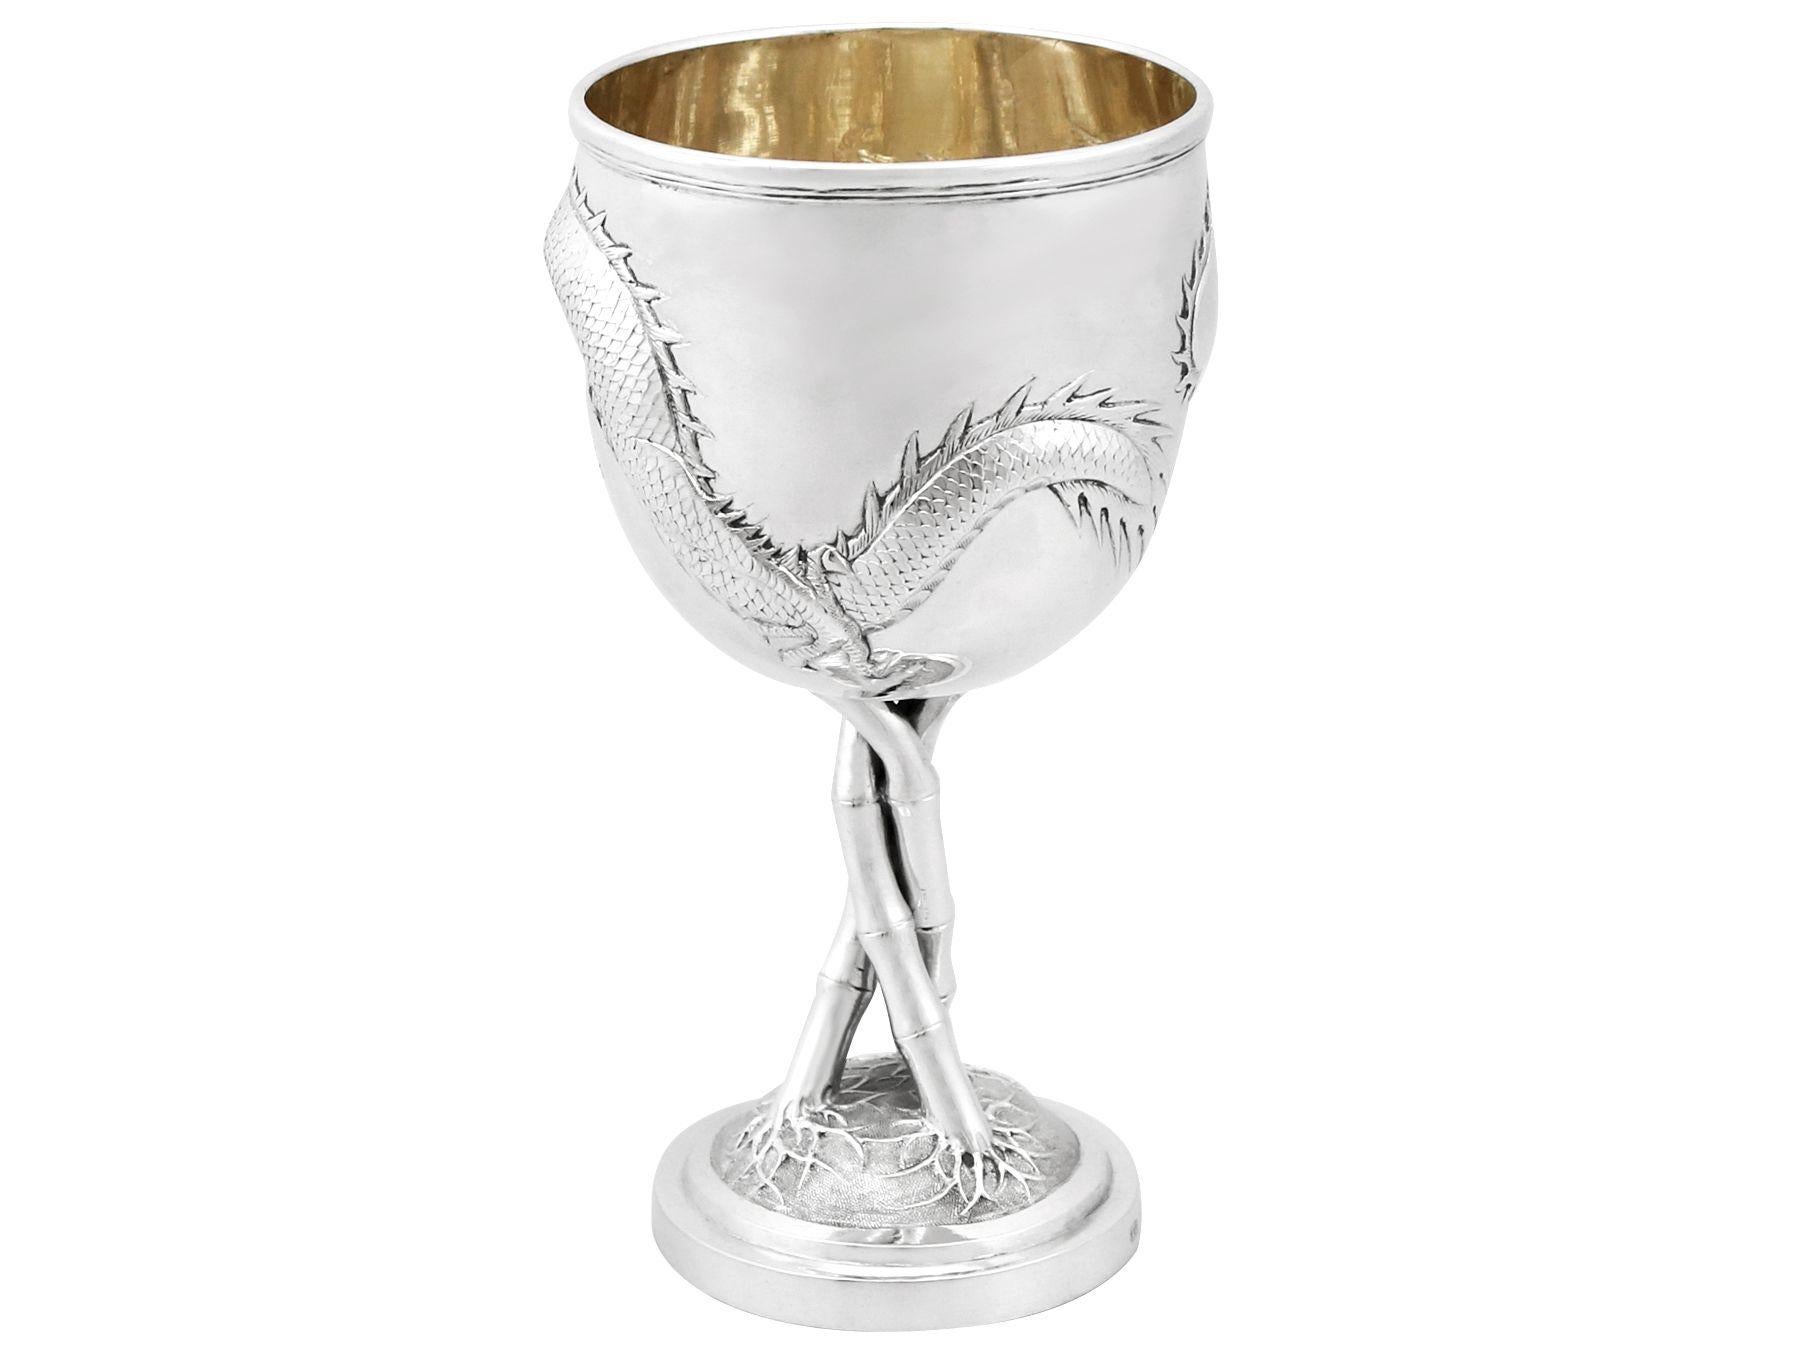 Antique Chinese Export Silver Goblet Circa 1900 In Excellent Condition For Sale In Jesmond, Newcastle Upon Tyne